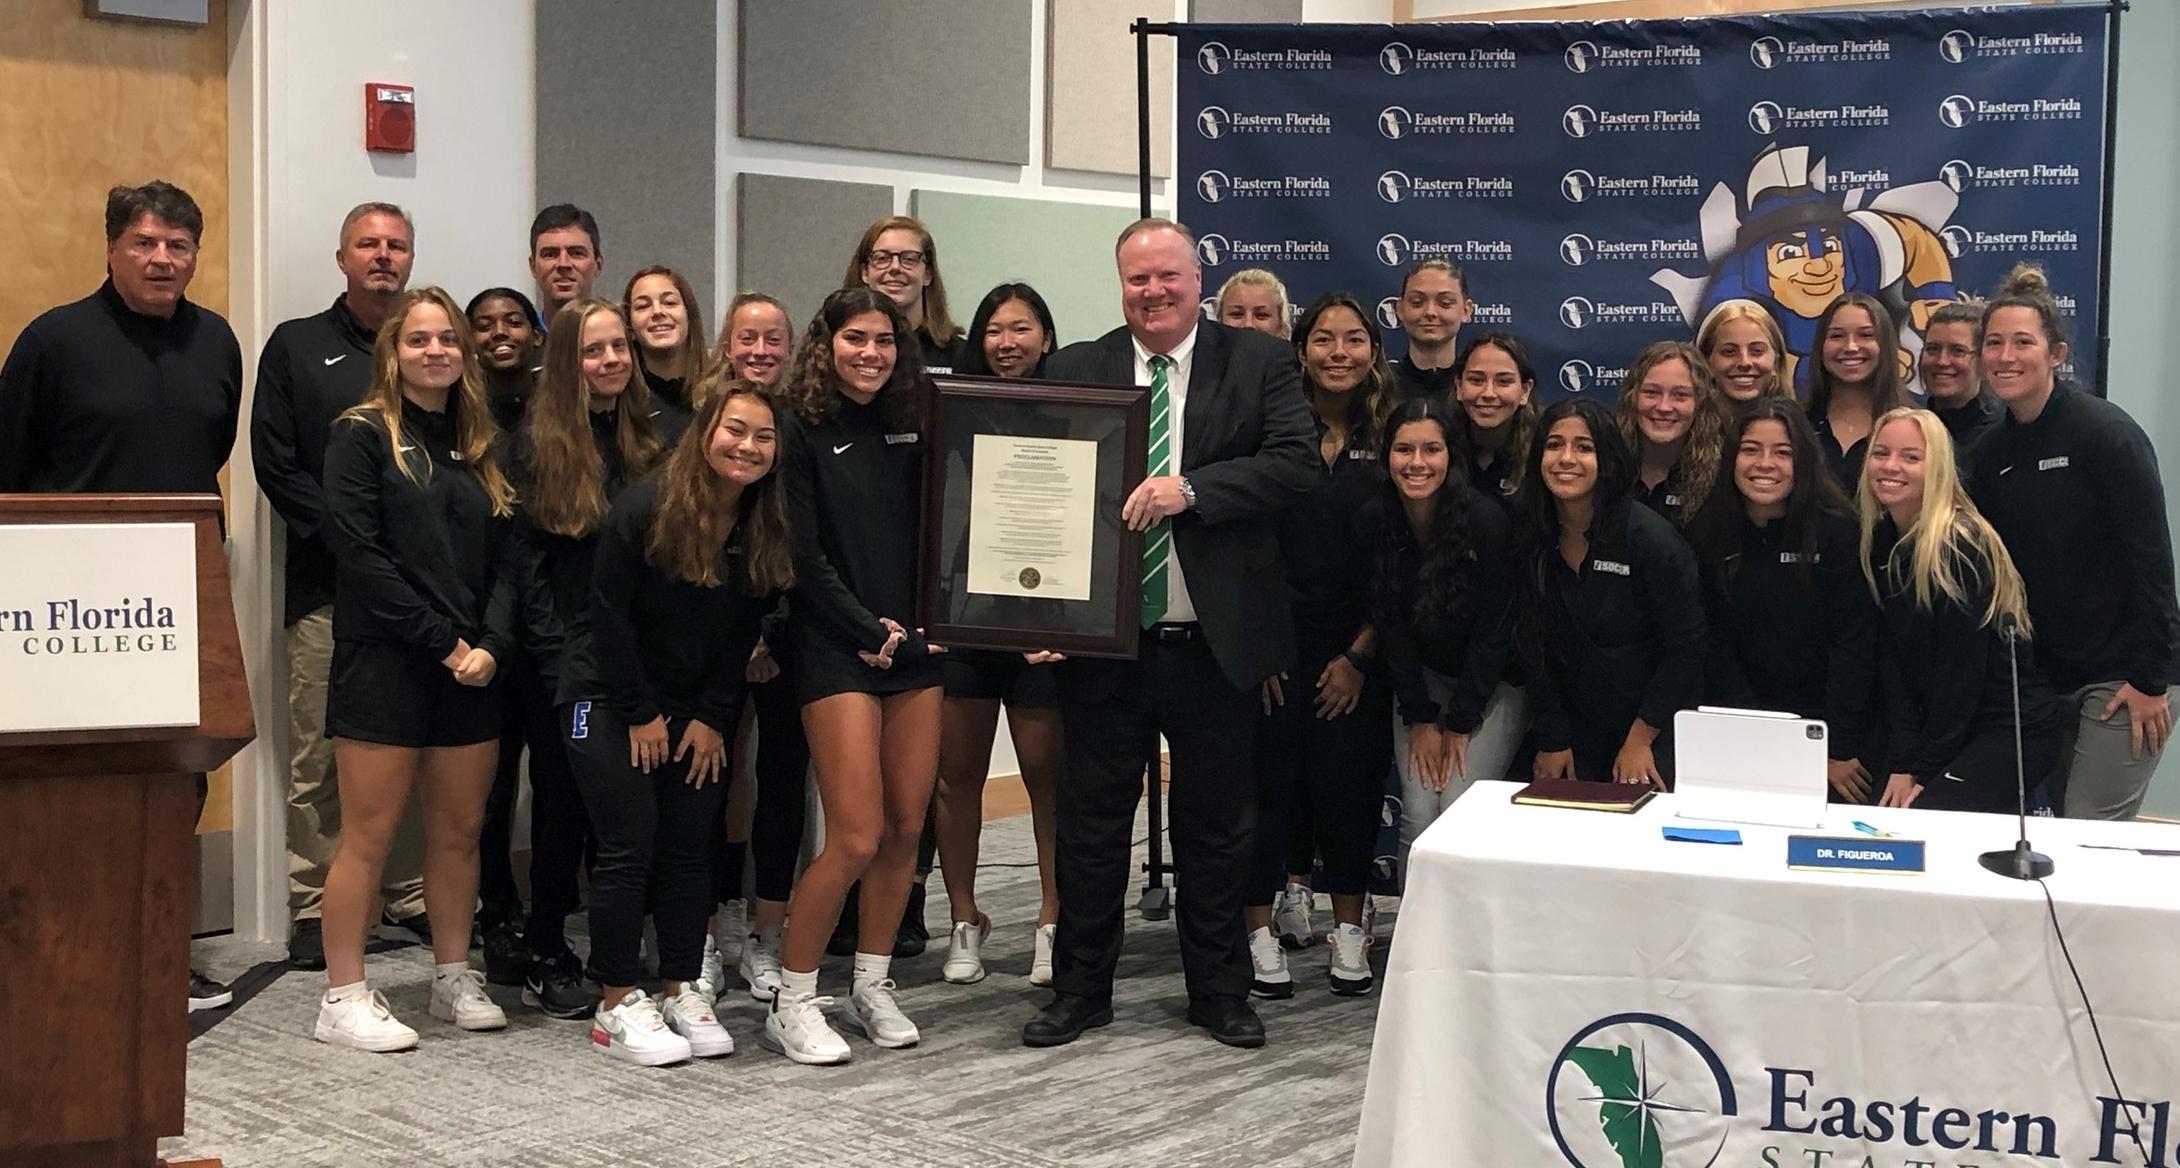 National Championship women's soccer team recognized by EFSC Board of Trustees